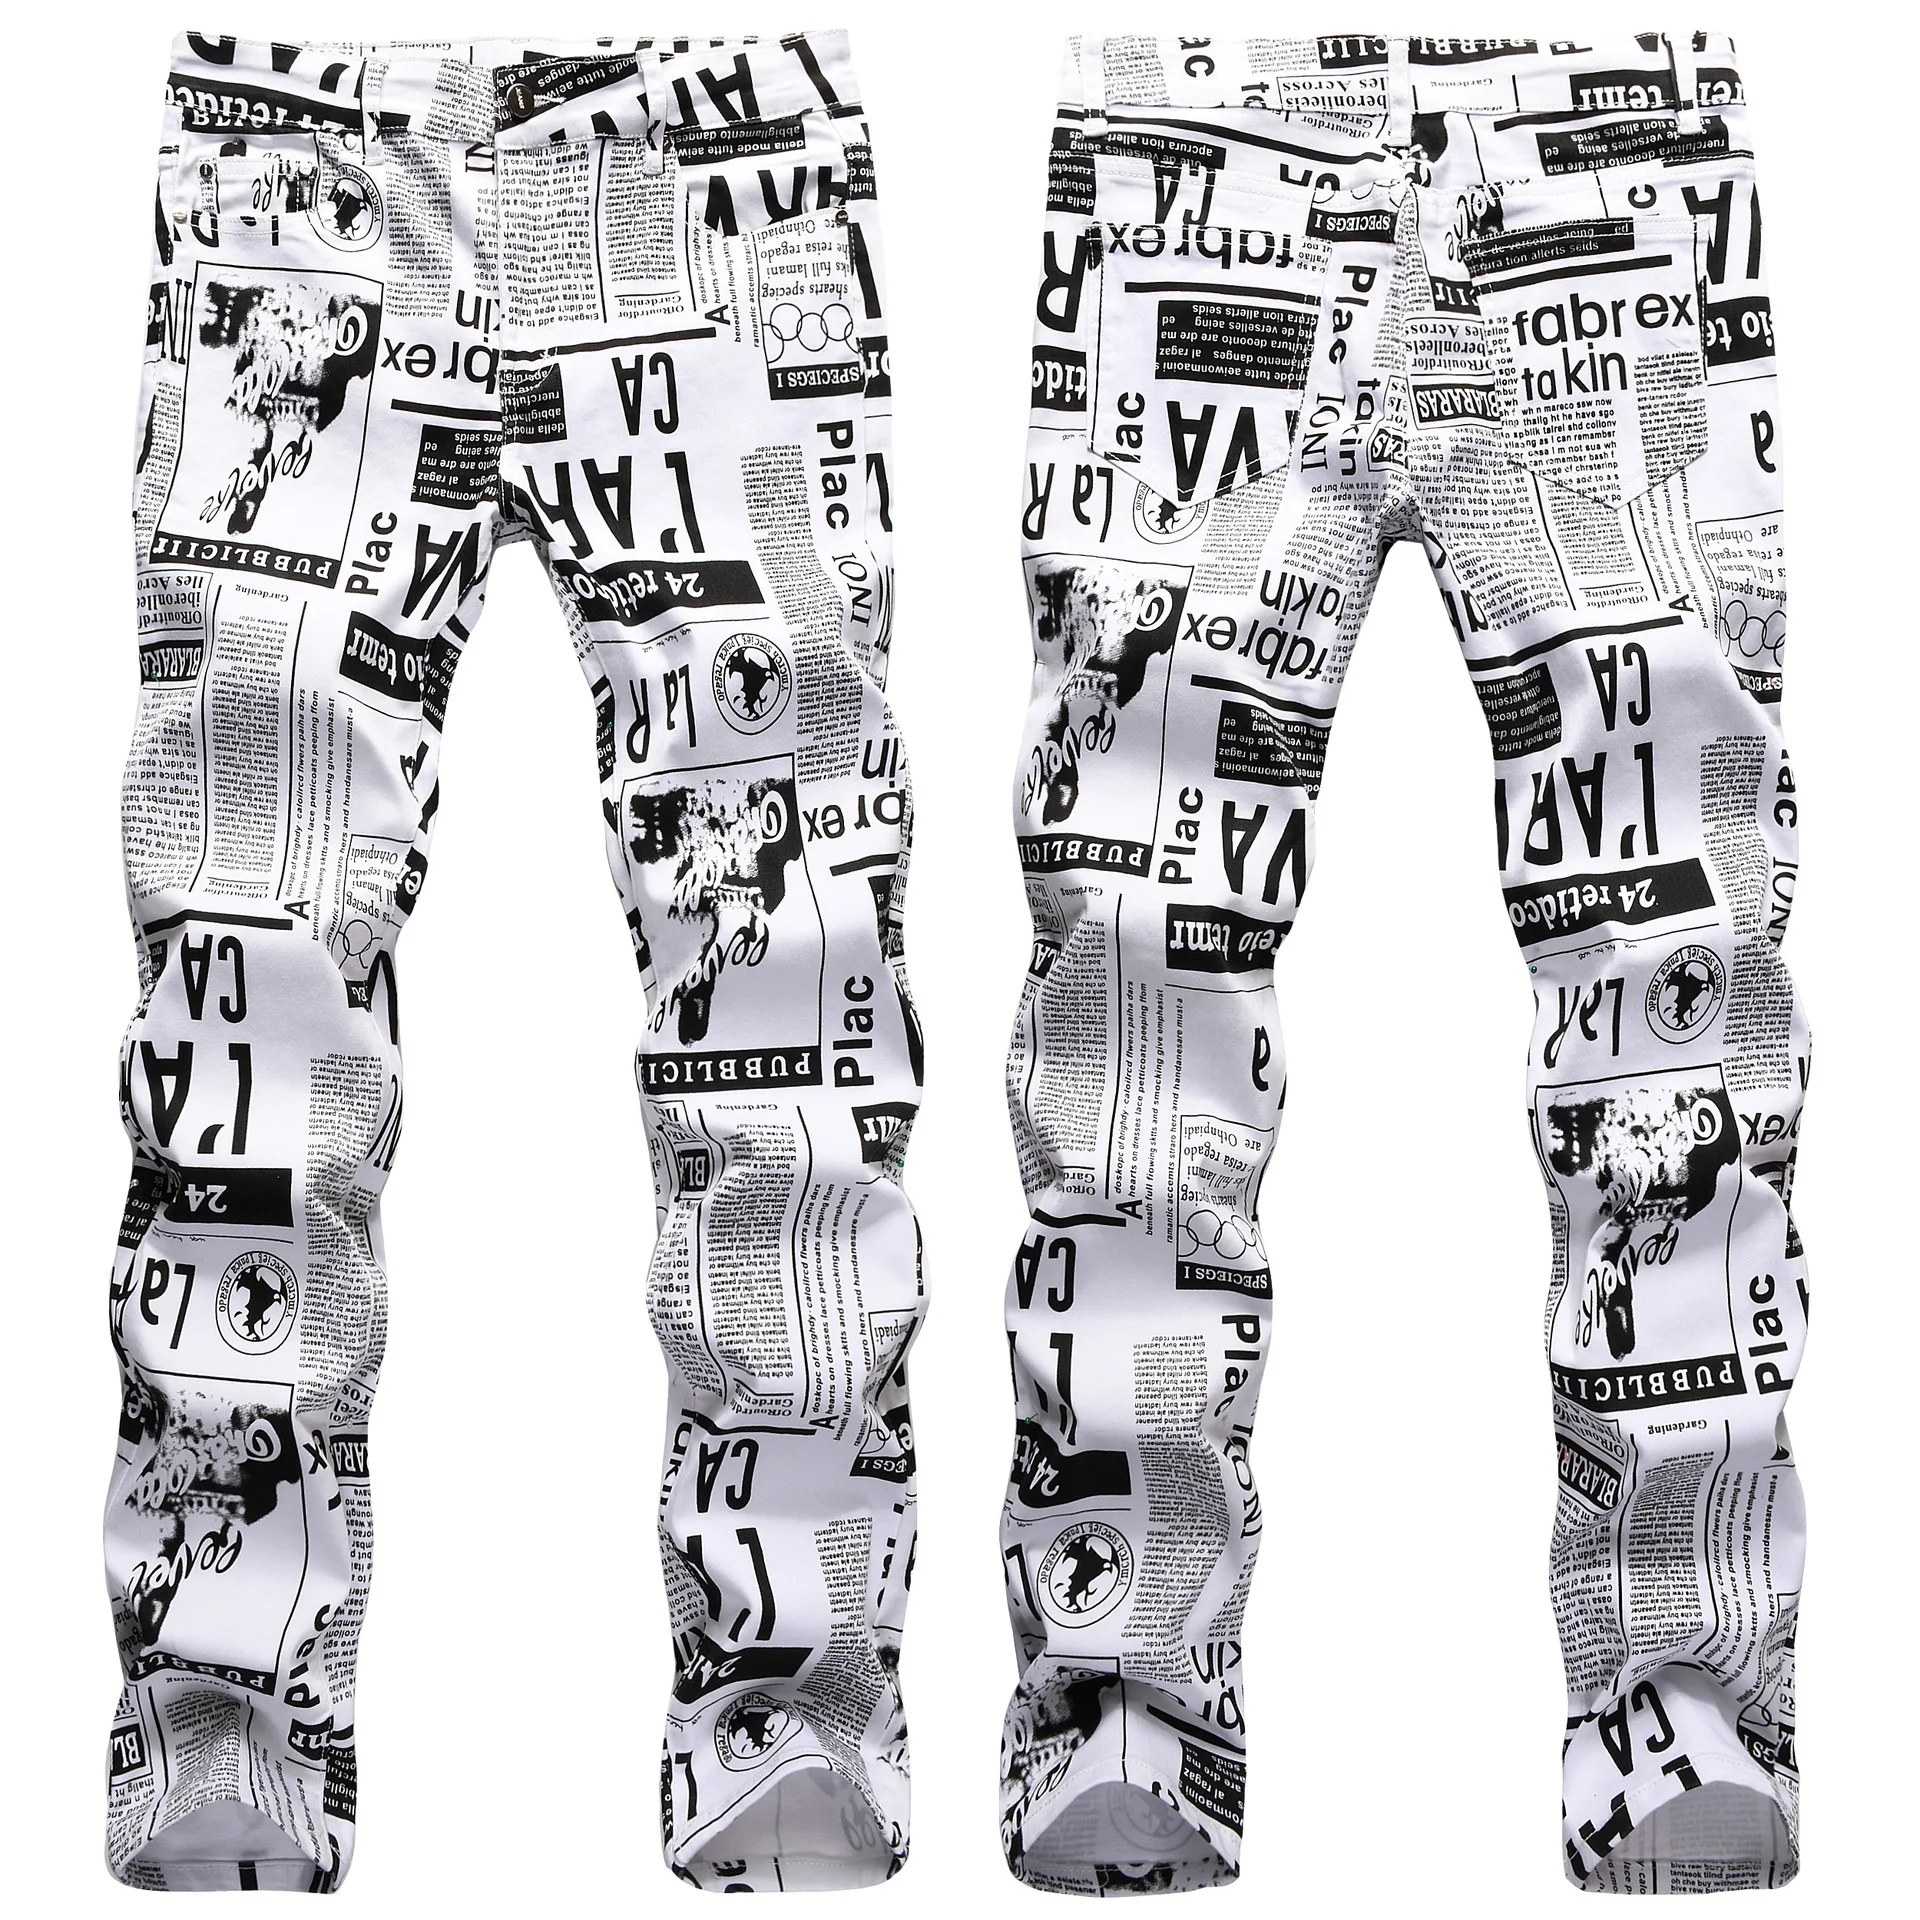 Men’s High Quality Street Fashion Prints Jeans,Slim-fit Stretch Denim Pants,Newspaper Painting Party Jeans,Cool Casual Jeans;